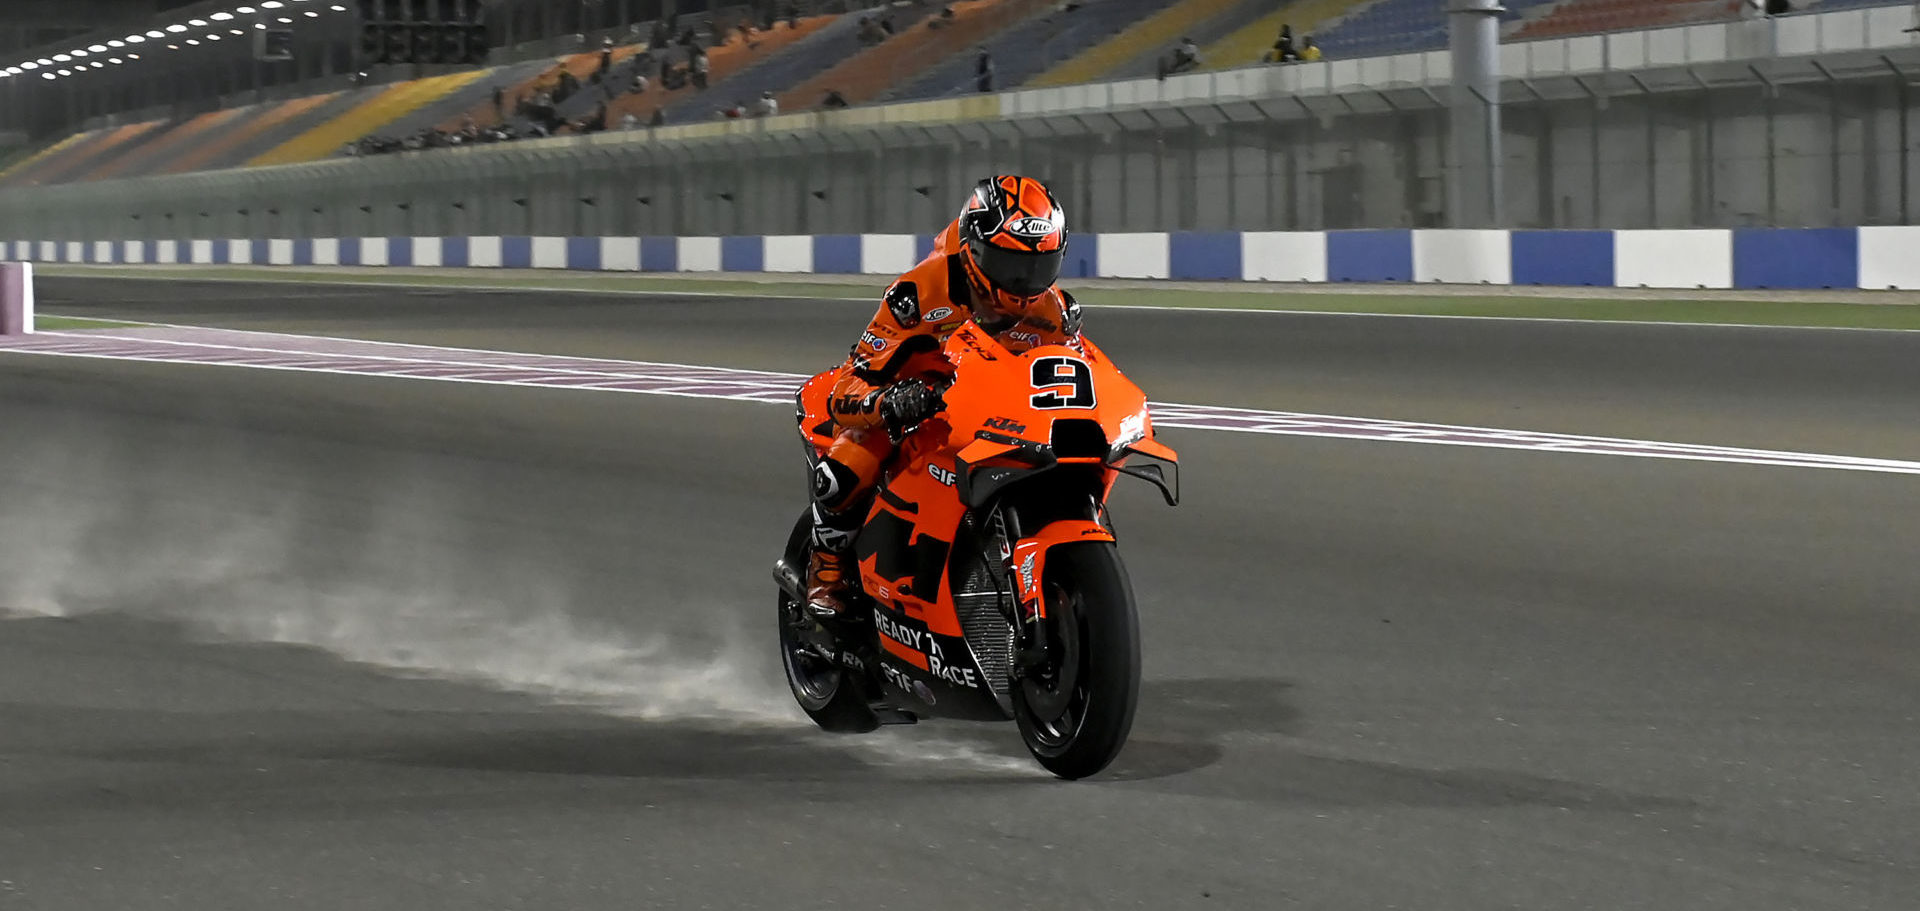 Danilo Petrucci (9) was quickest MotoGP rider on Friday in Qatar, but a sandstorm kept most riders off track and brought a pre-mature end to testing. Photo courtesy Tech 3.